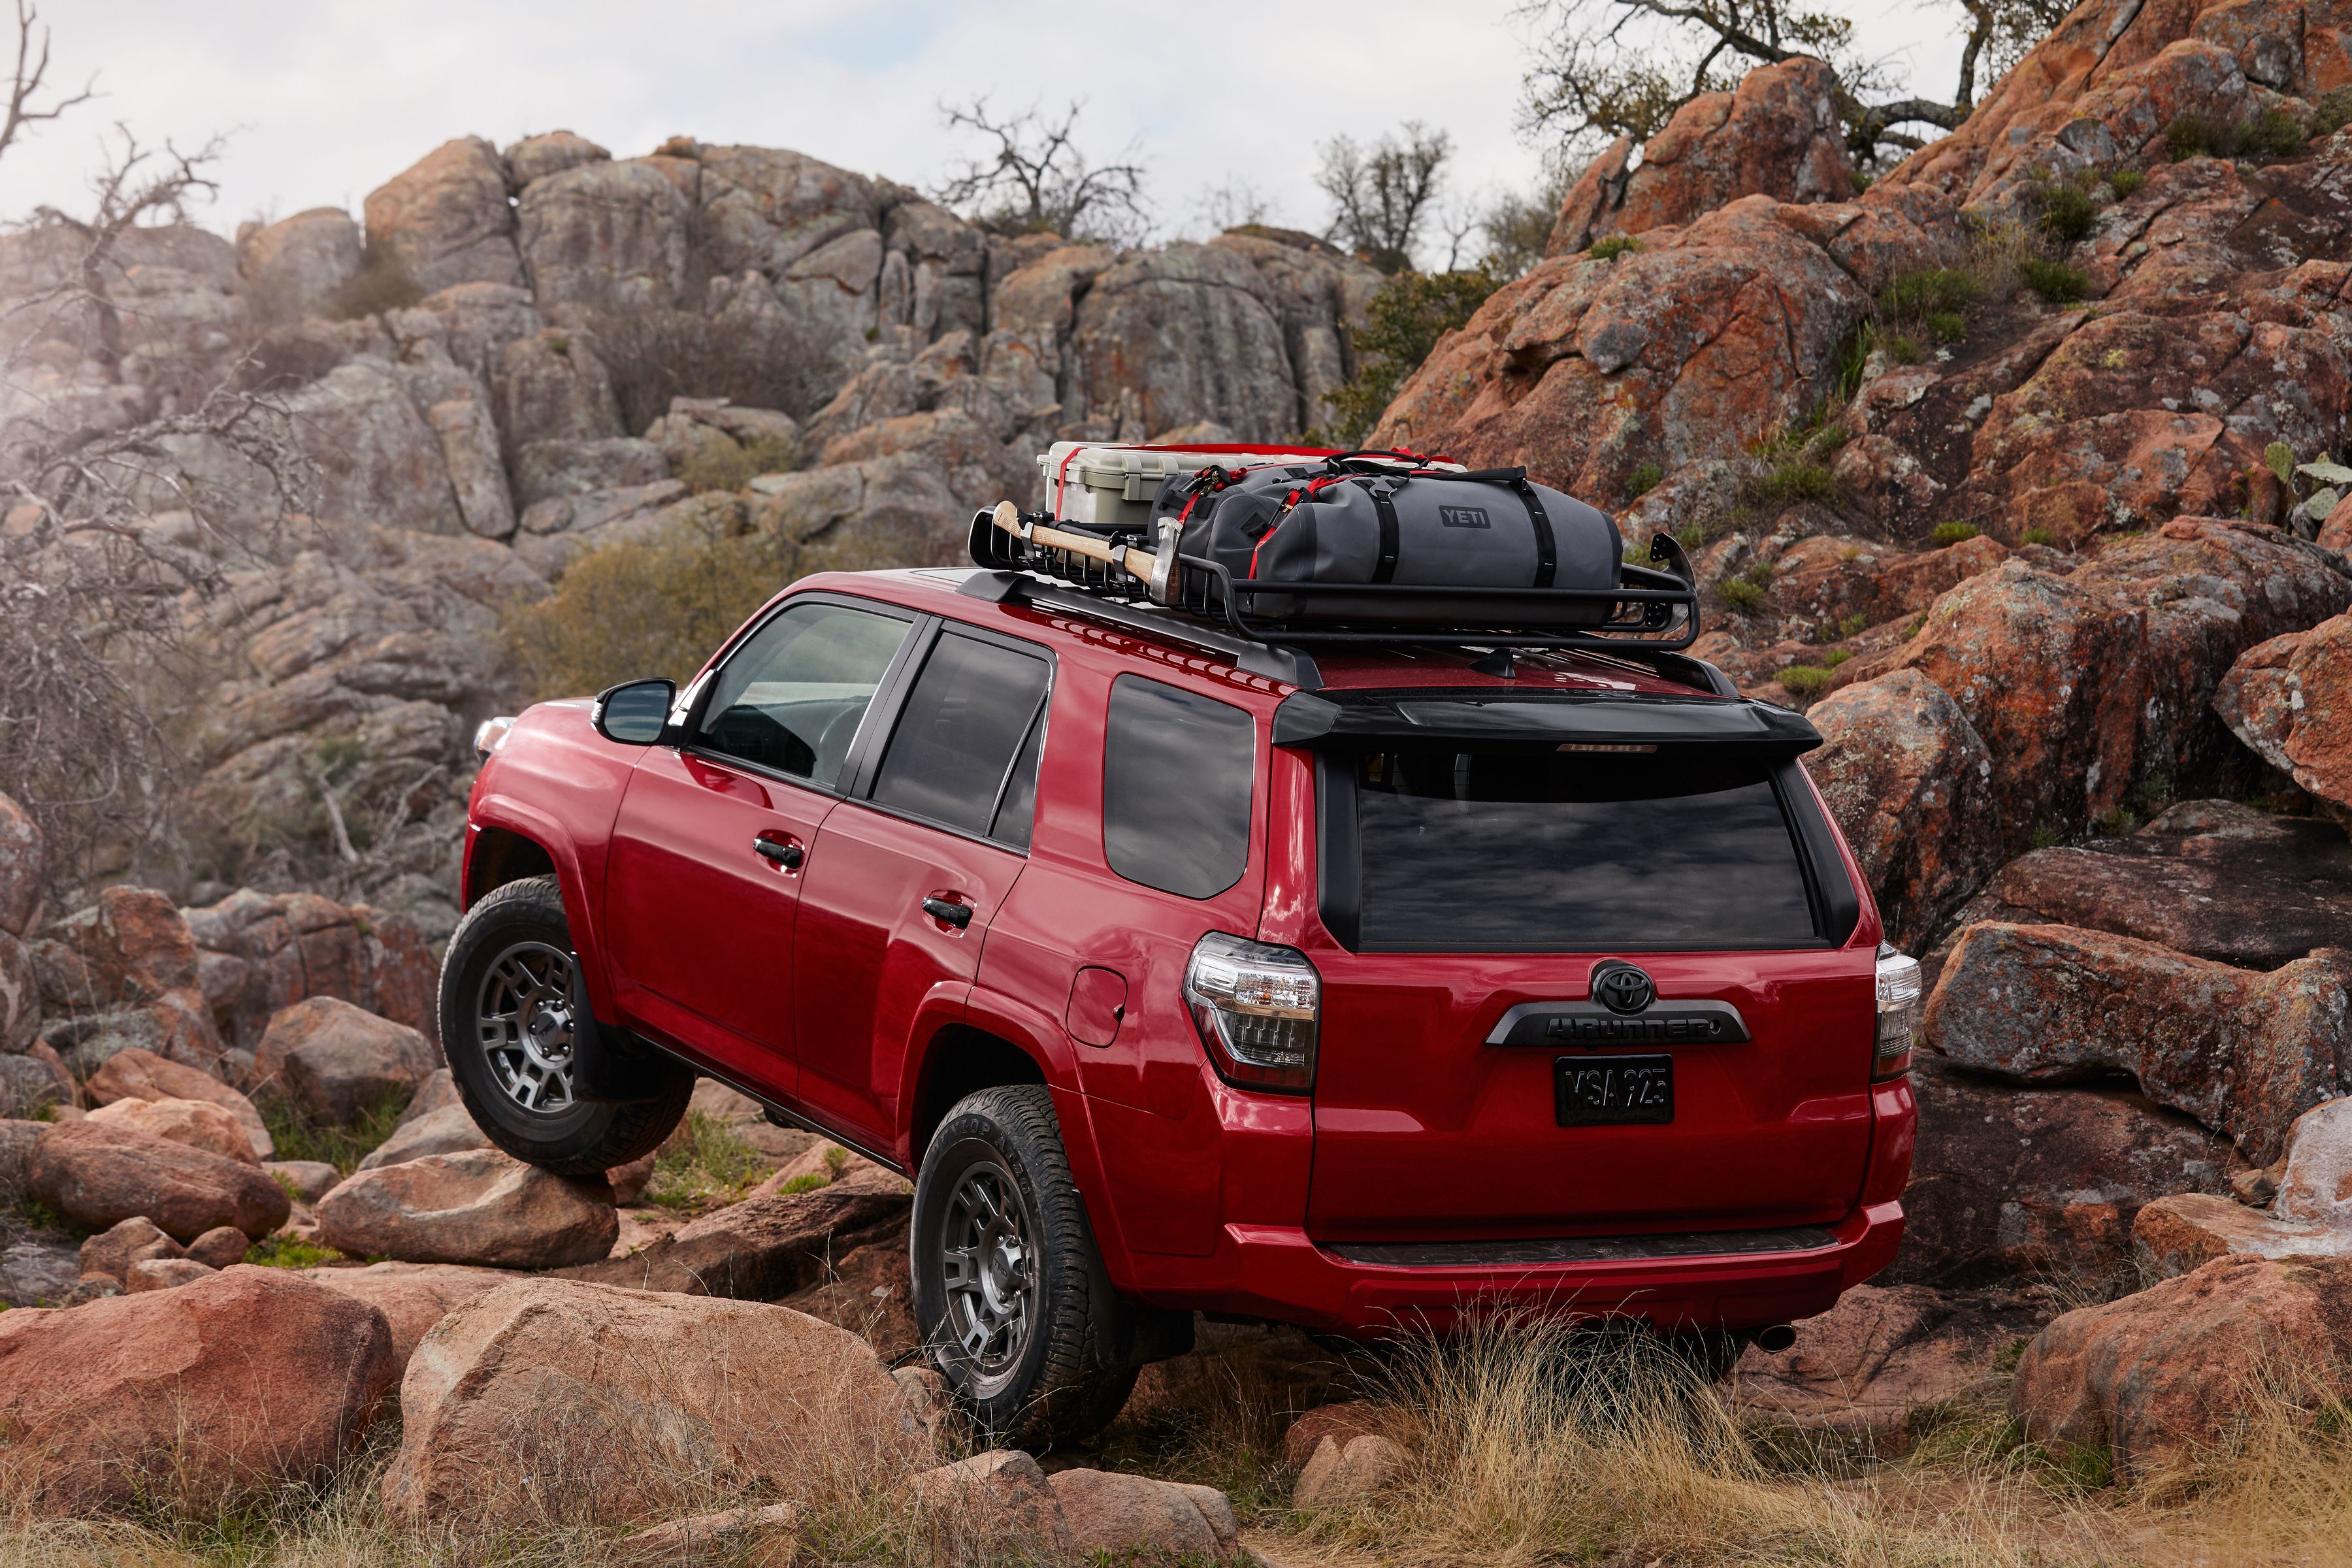 2020 Toyota 4Runner Venture Edition Is for Overlanding Pack Rats